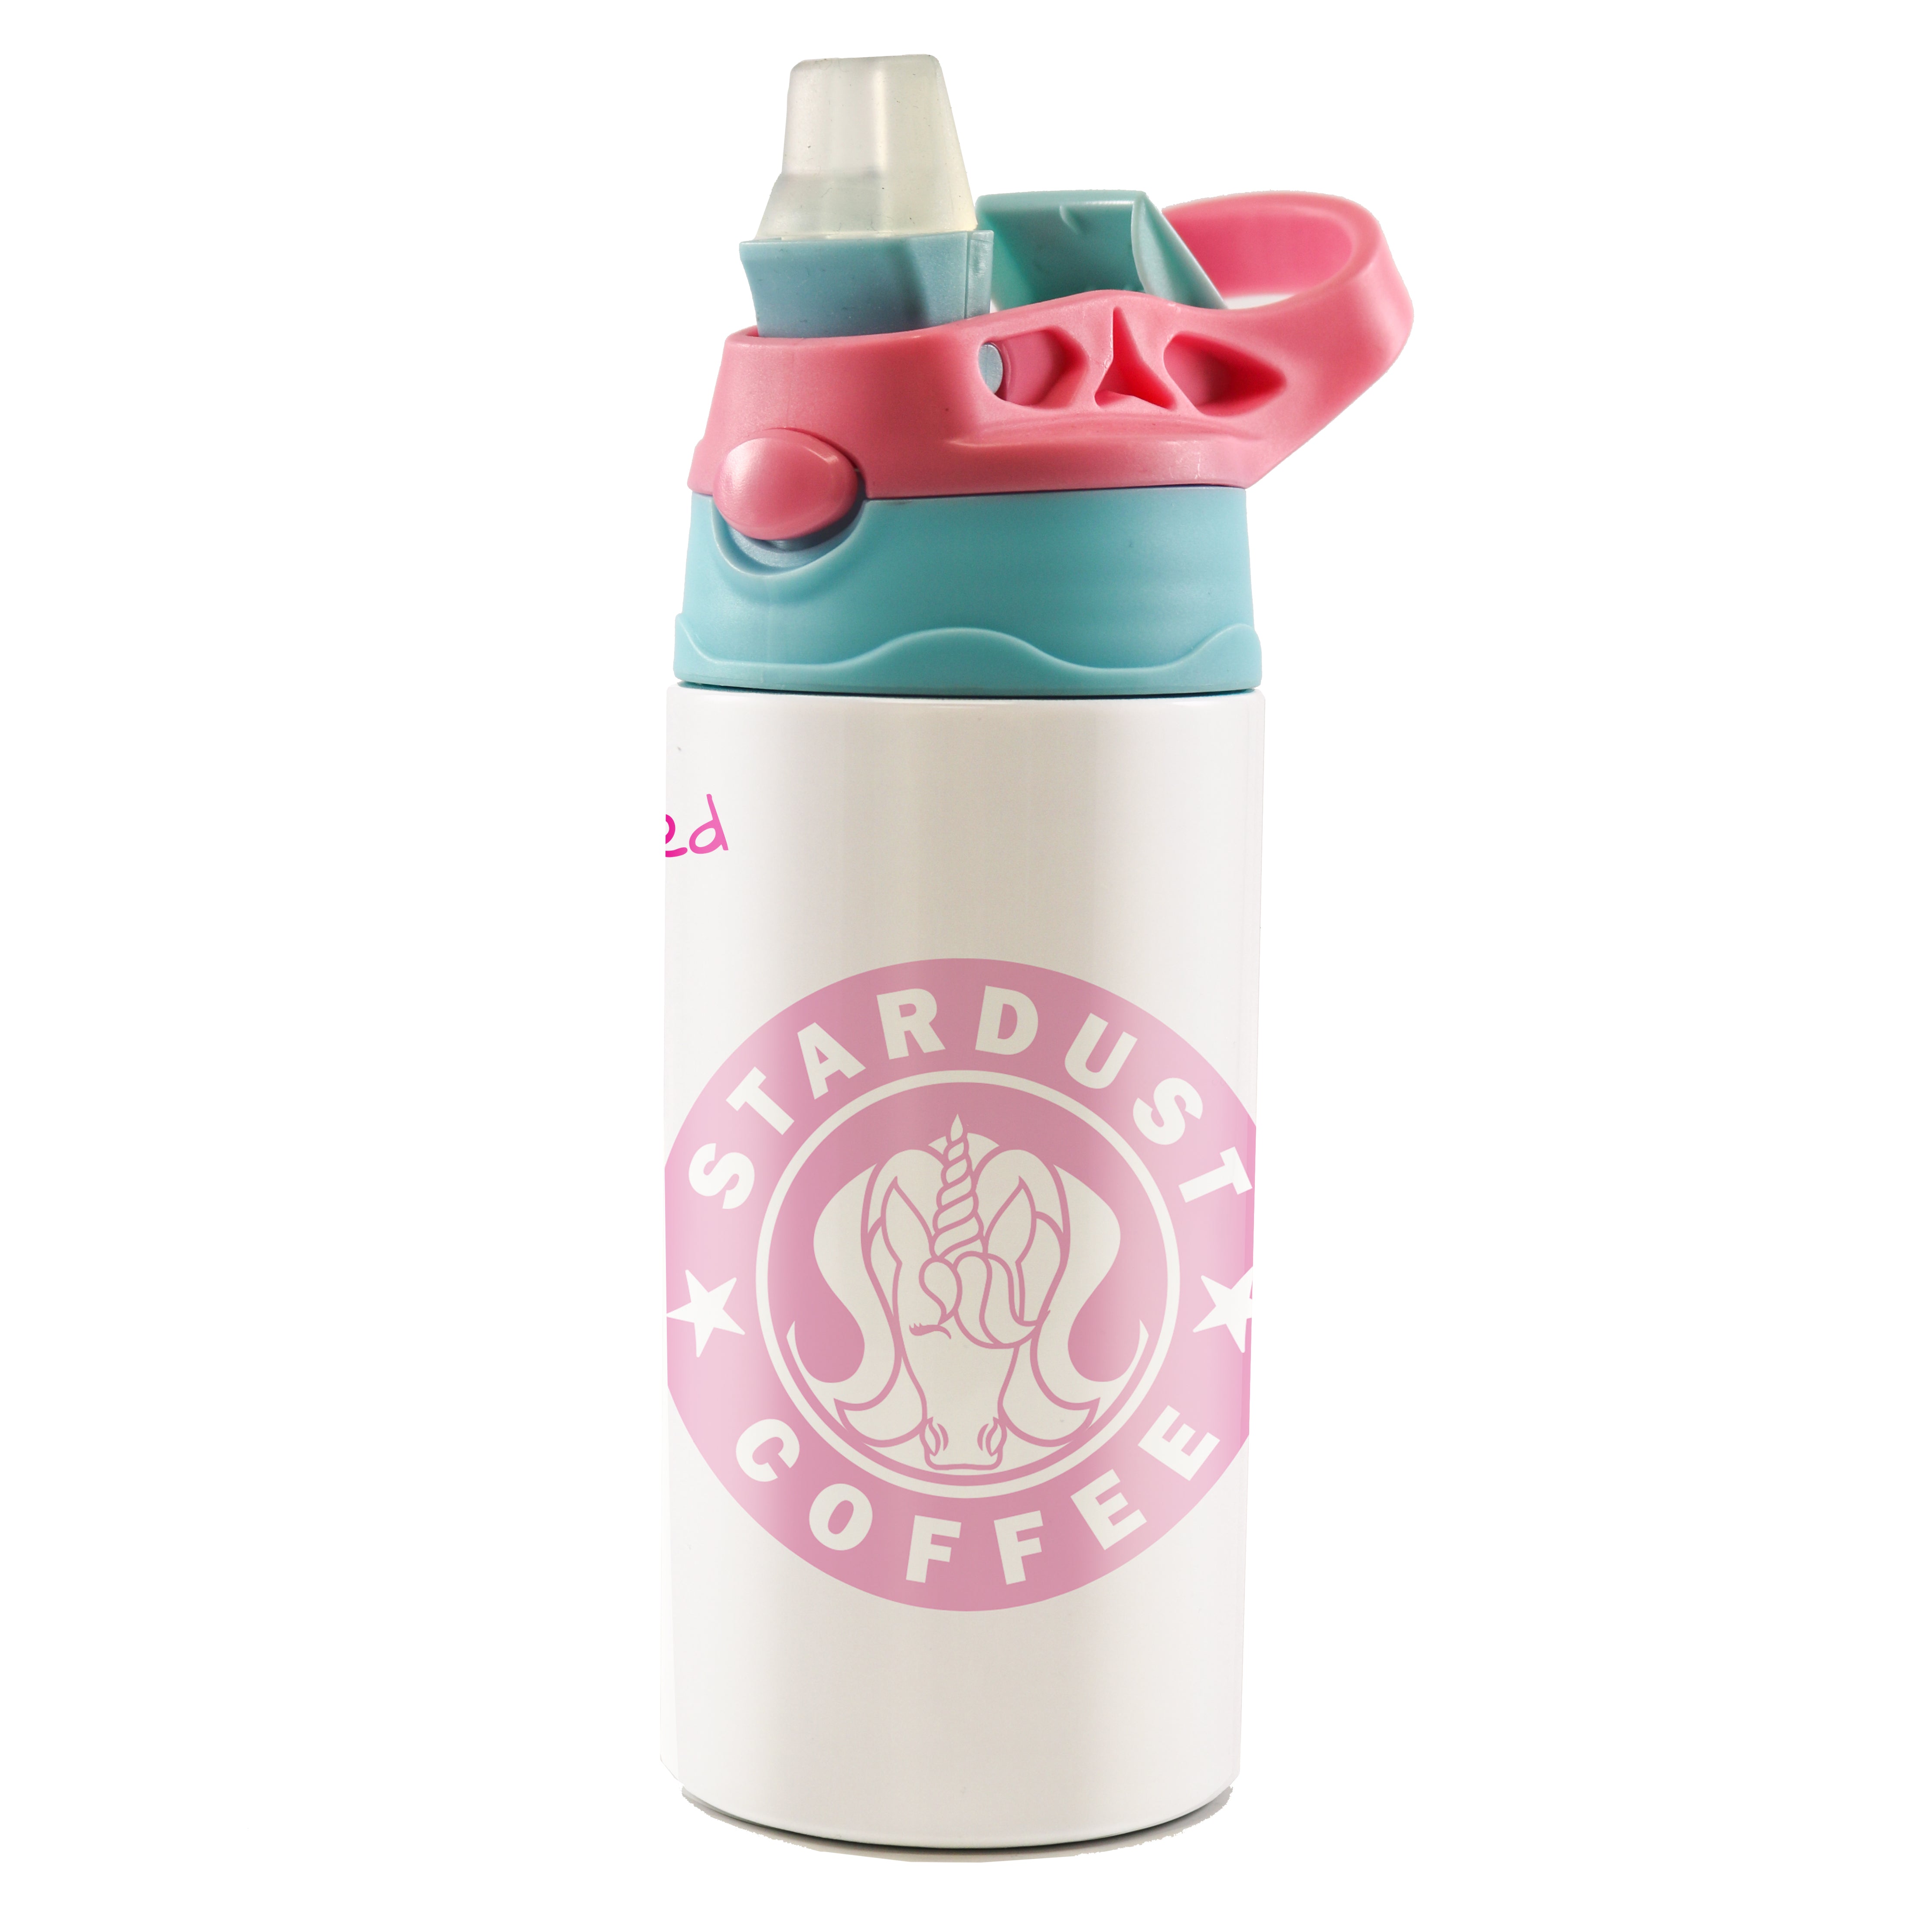 Kids Collection (Stardust Coffee - Personalized) 12 oz Stainless Steel Water Bottle with Pink and Blue Lid